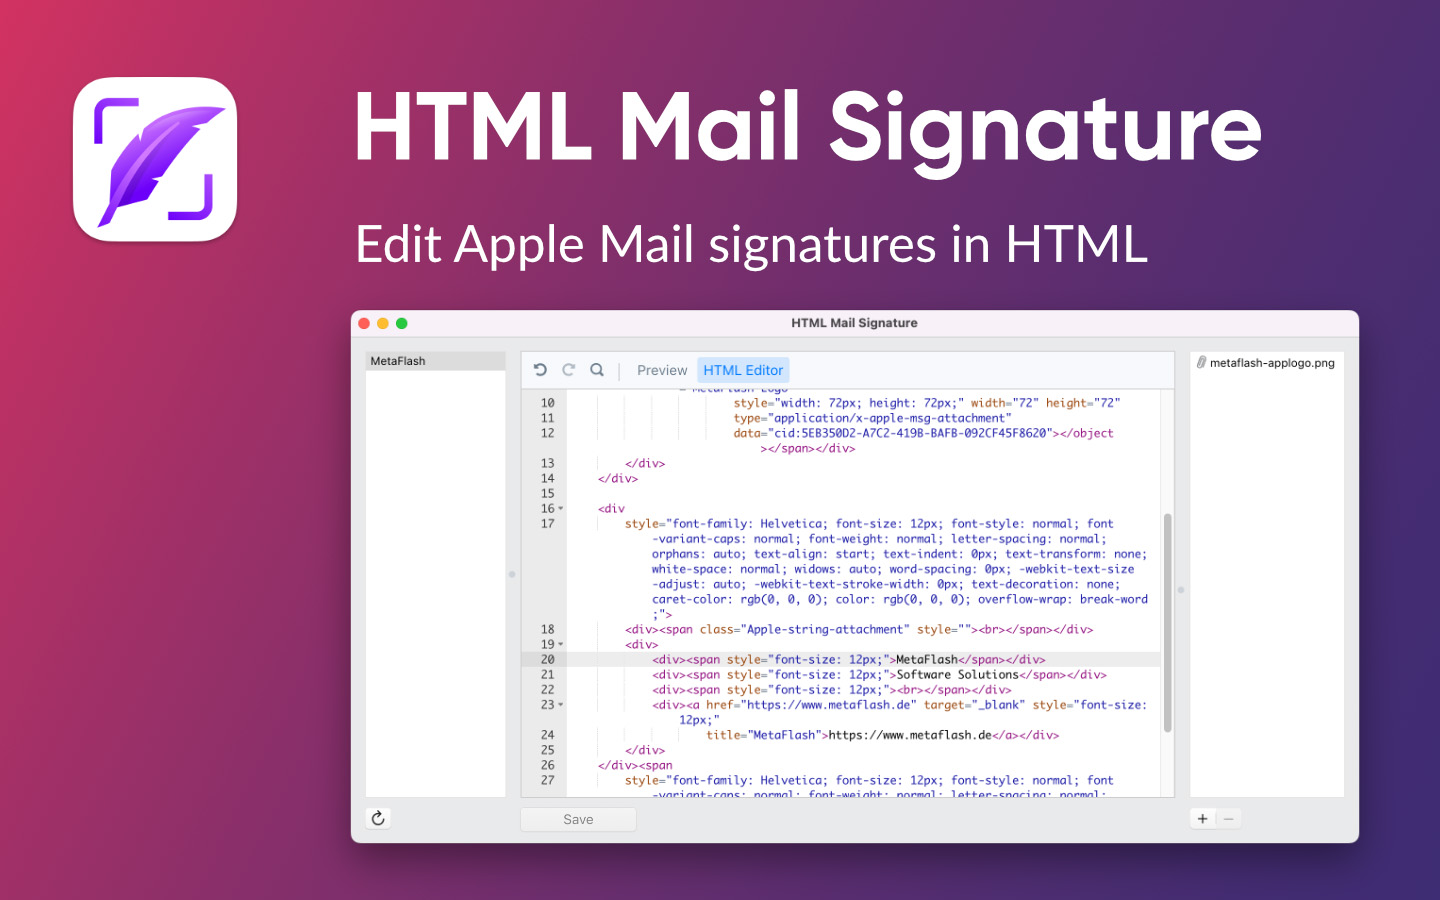  HTML Mail Signature available in the Mac App Store